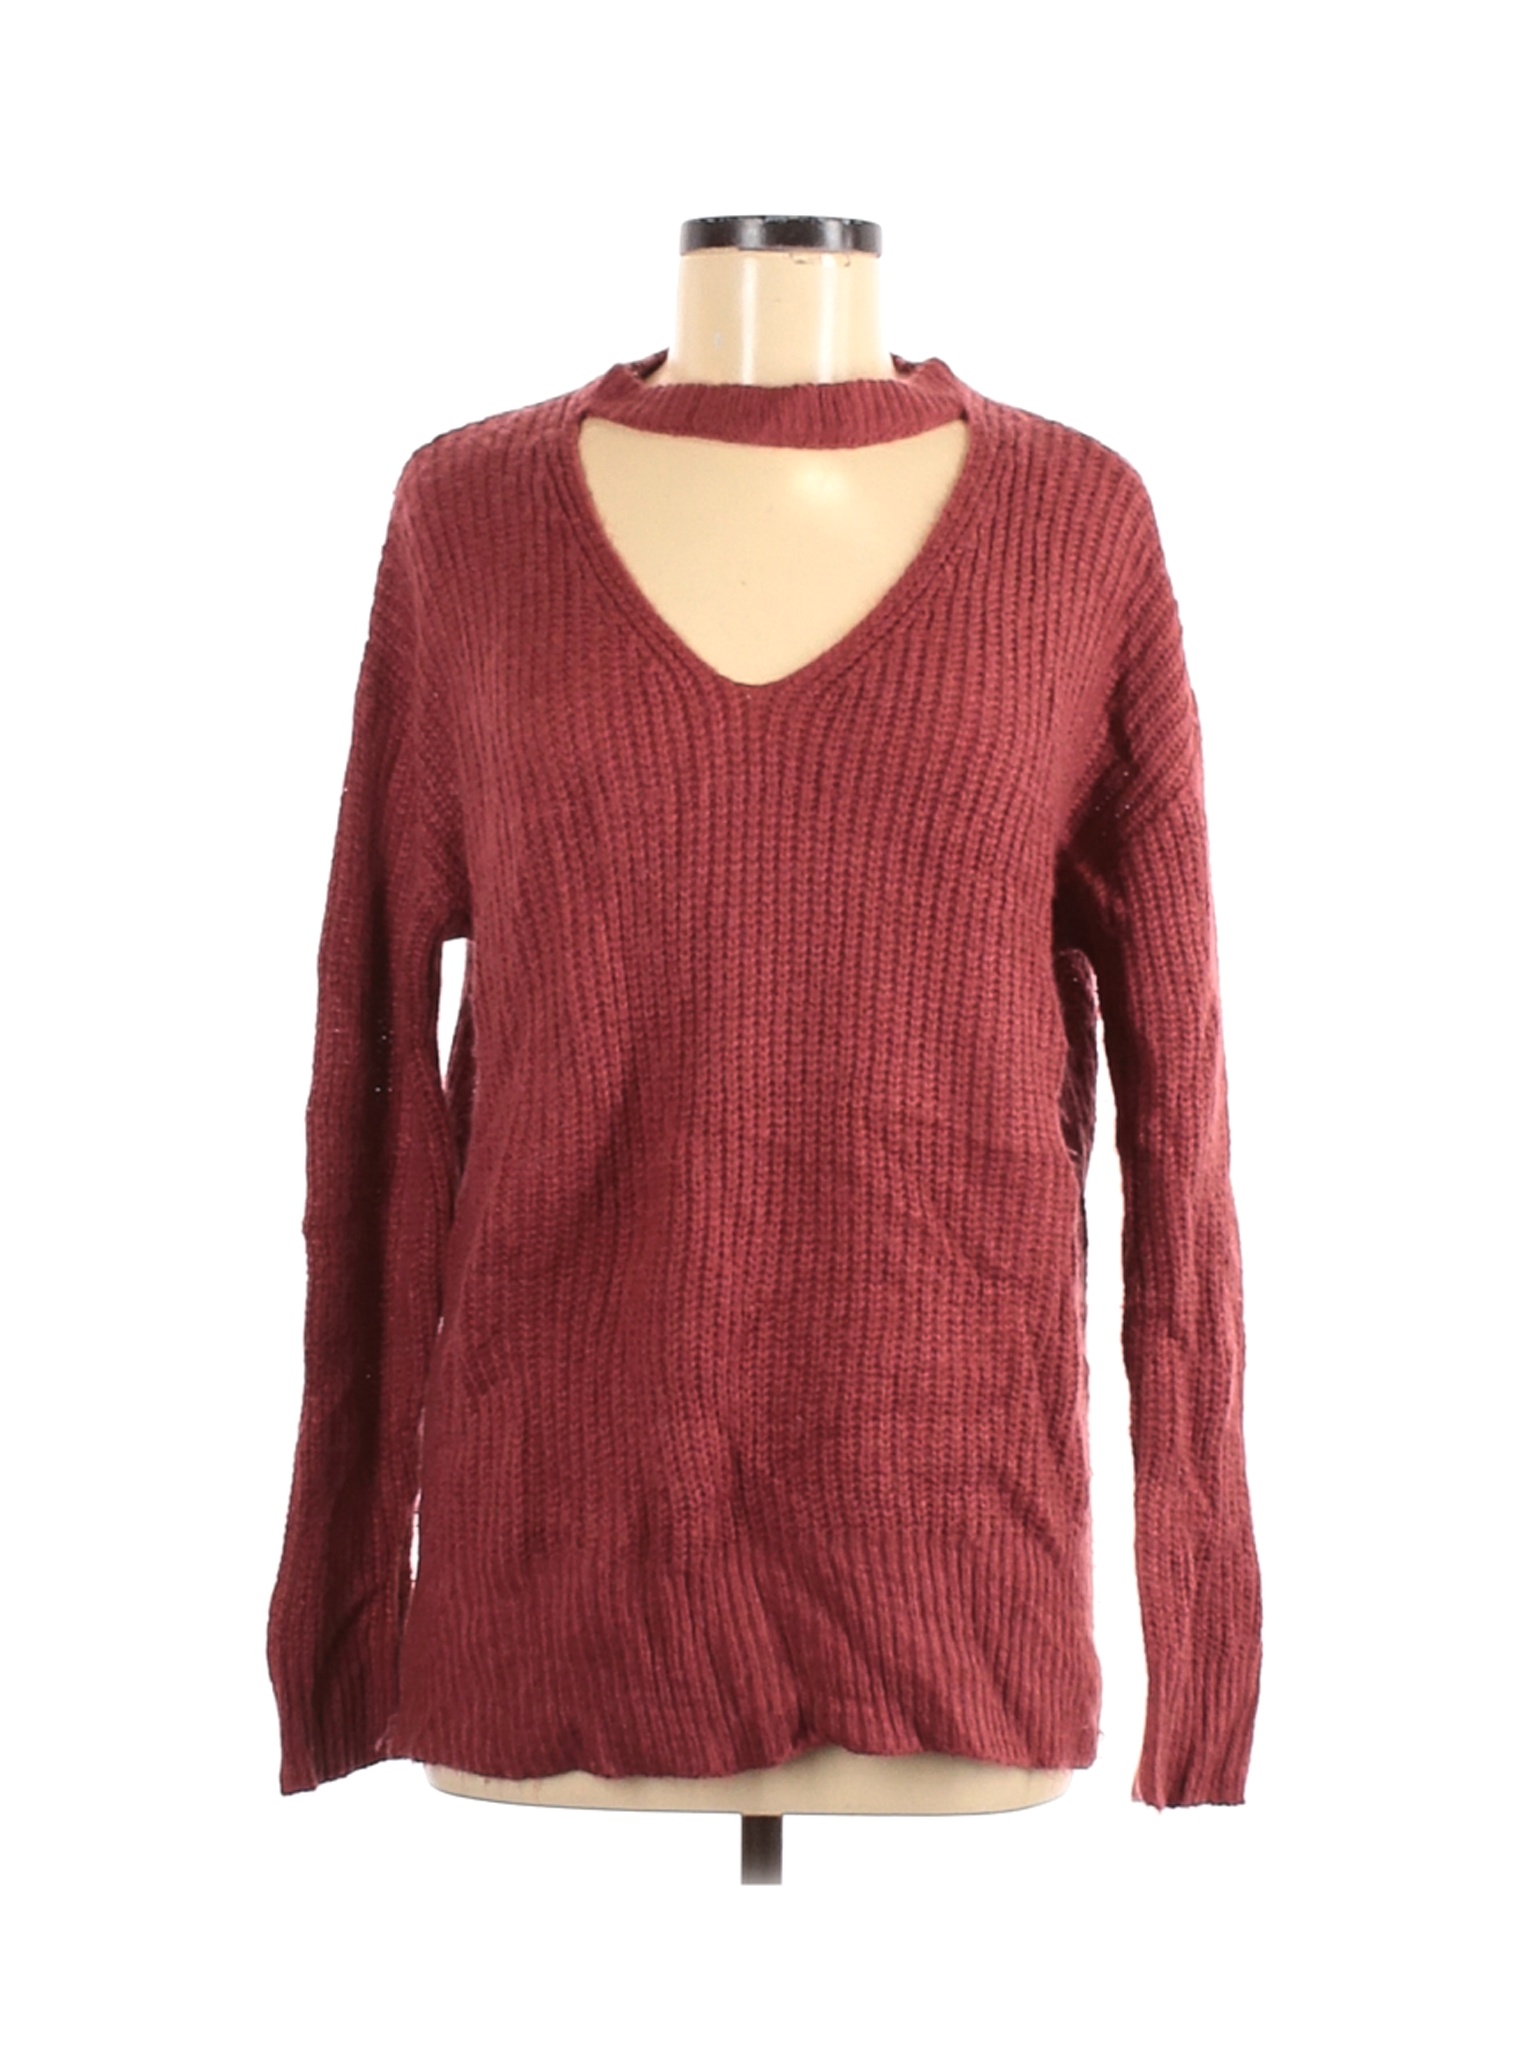 Staccato Women Red Pullover Sweater L | eBay